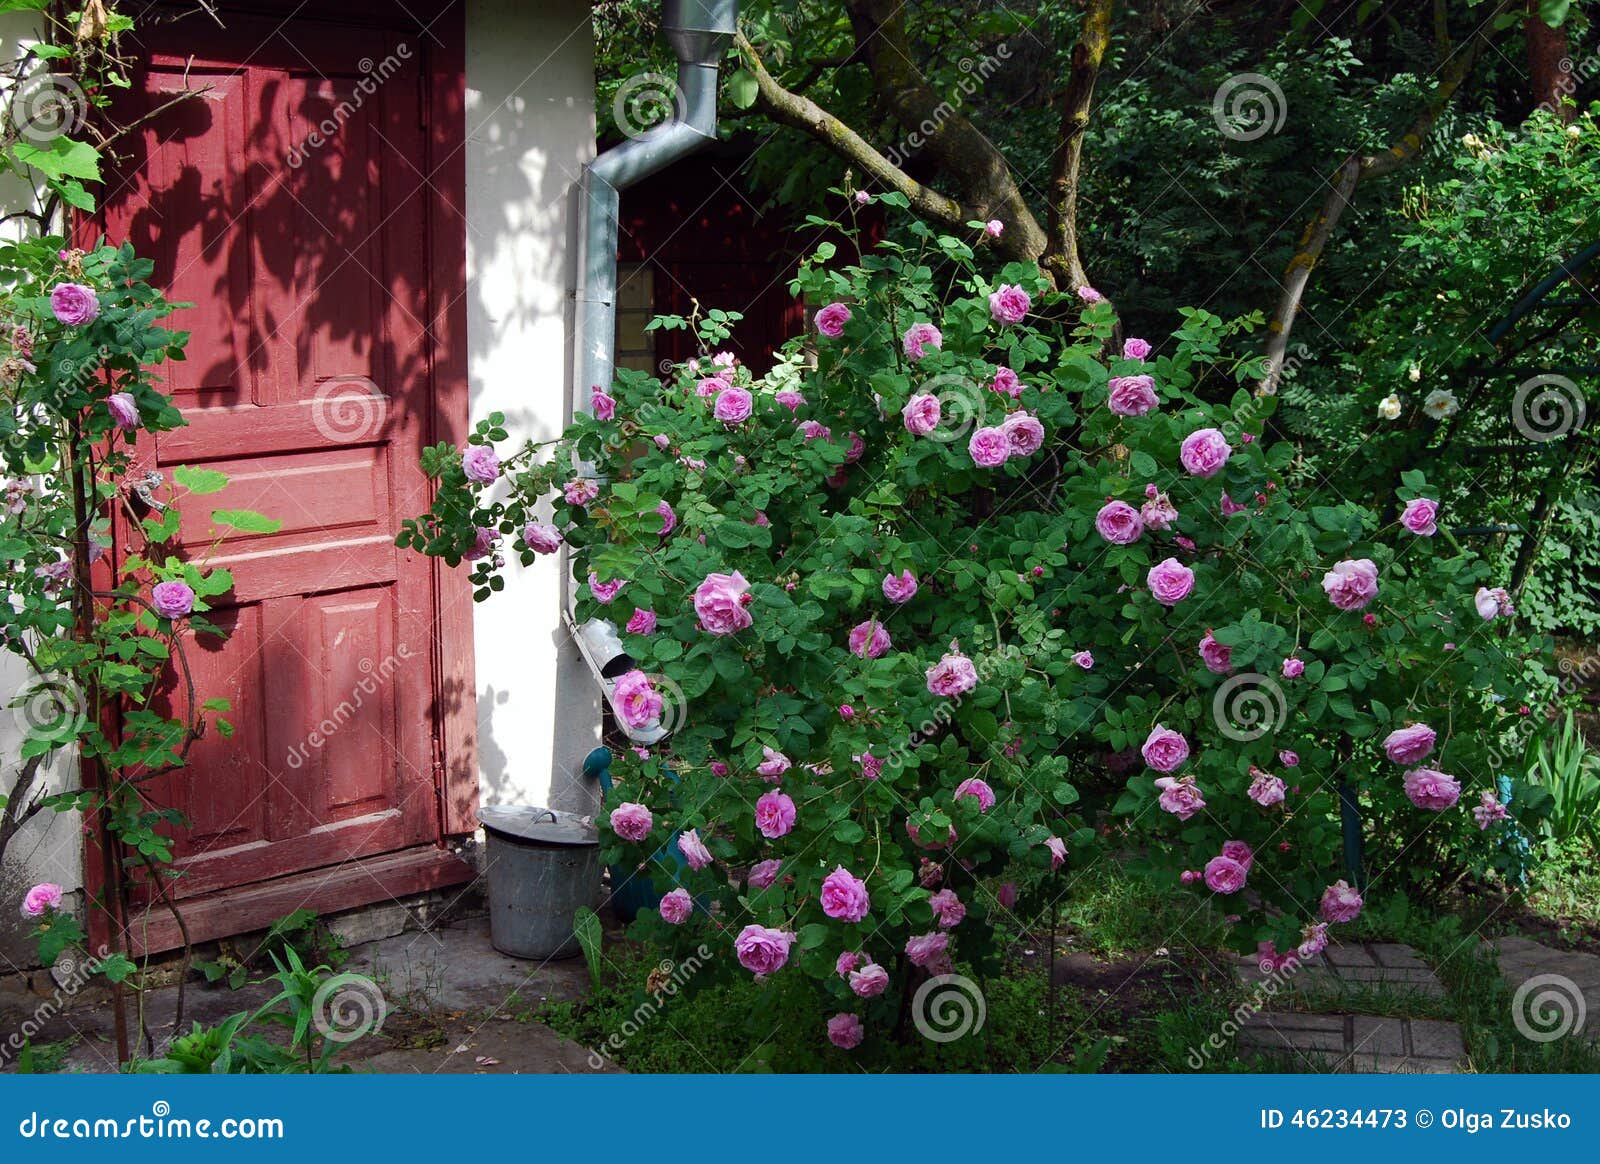 rosebush with pink flowers